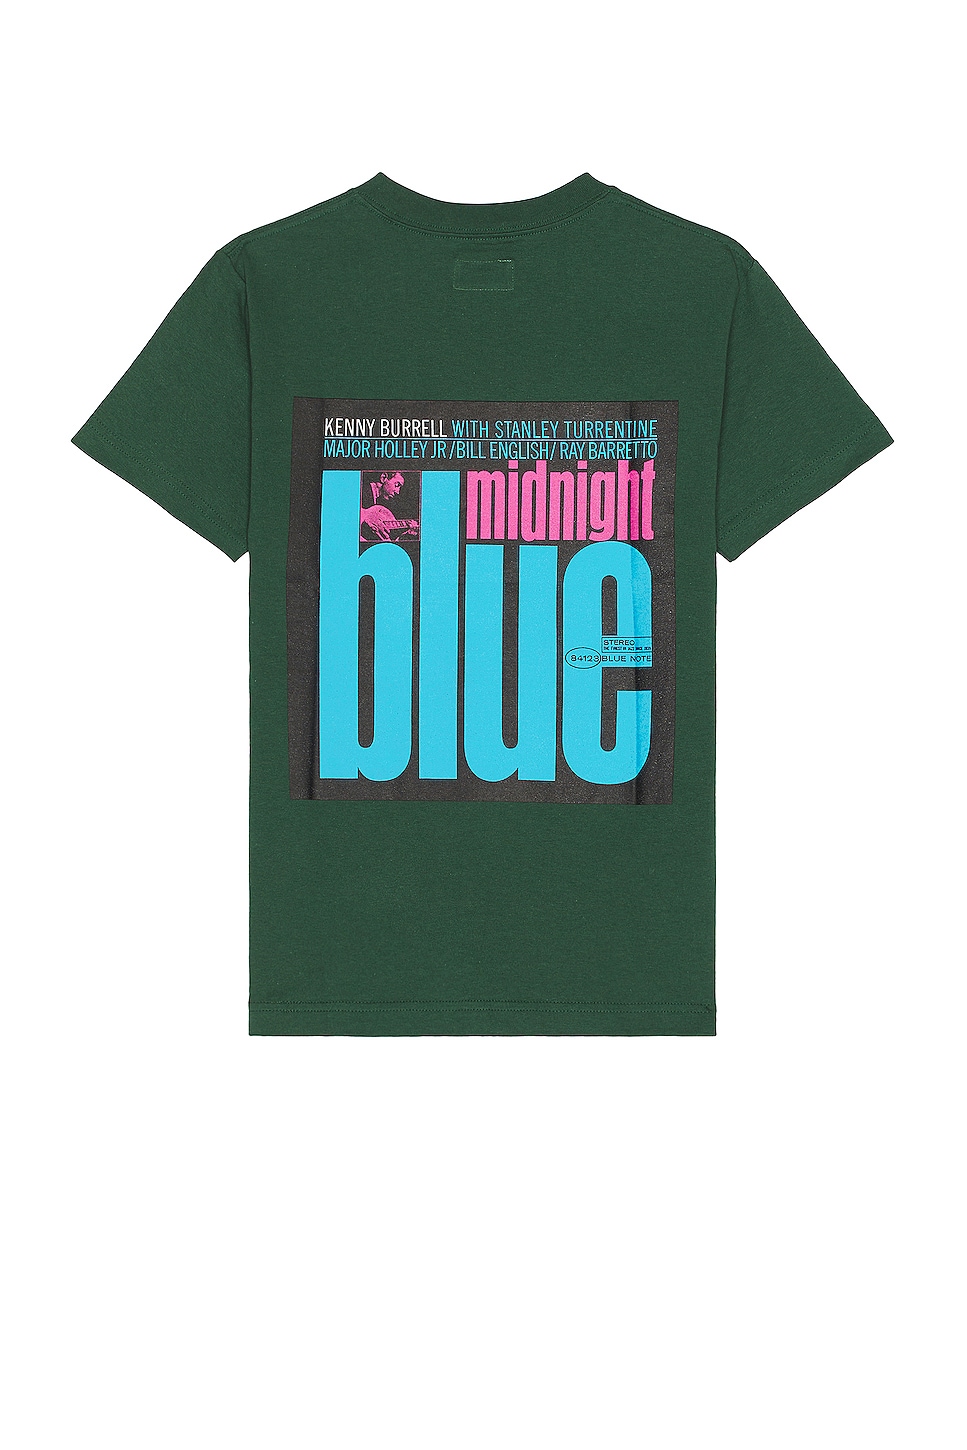 Blue Note T-shirt in Green